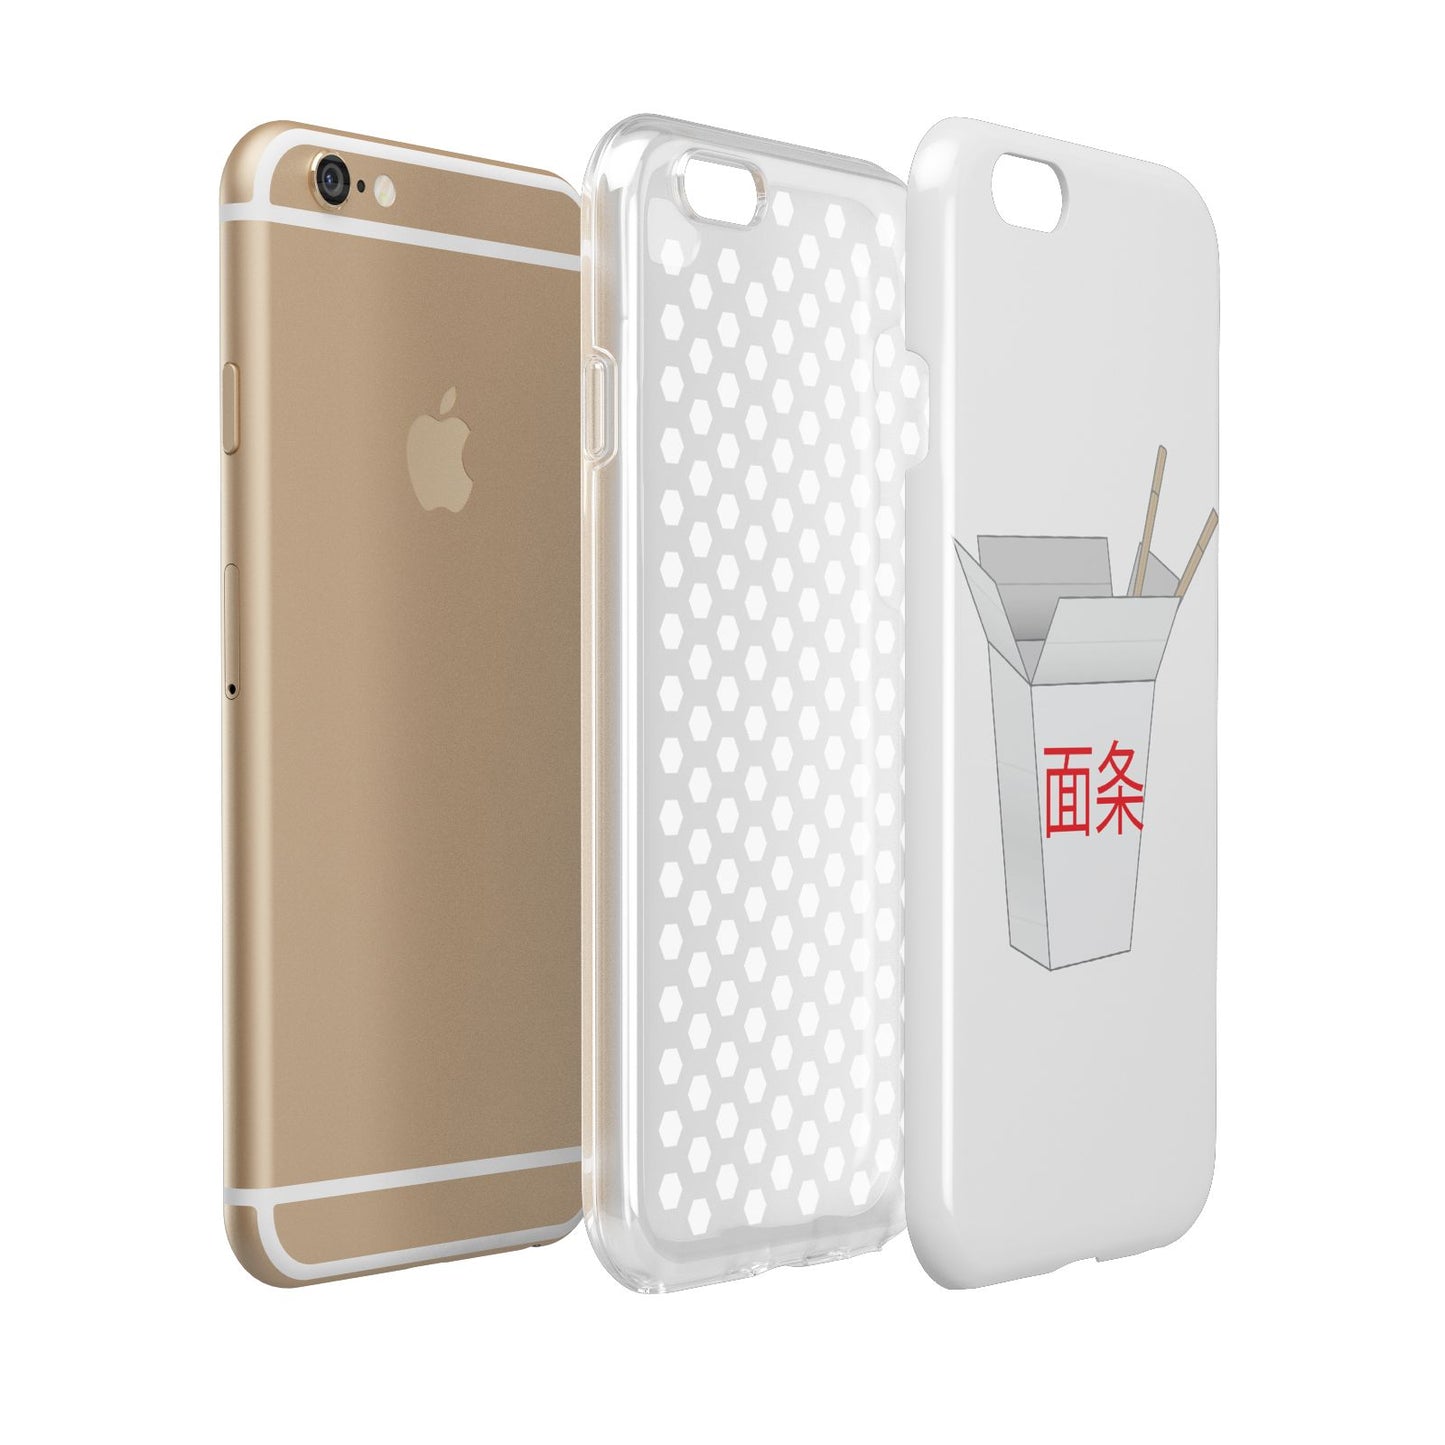 Chinese Takeaway Box Apple iPhone 6 3D Tough Case Expanded view